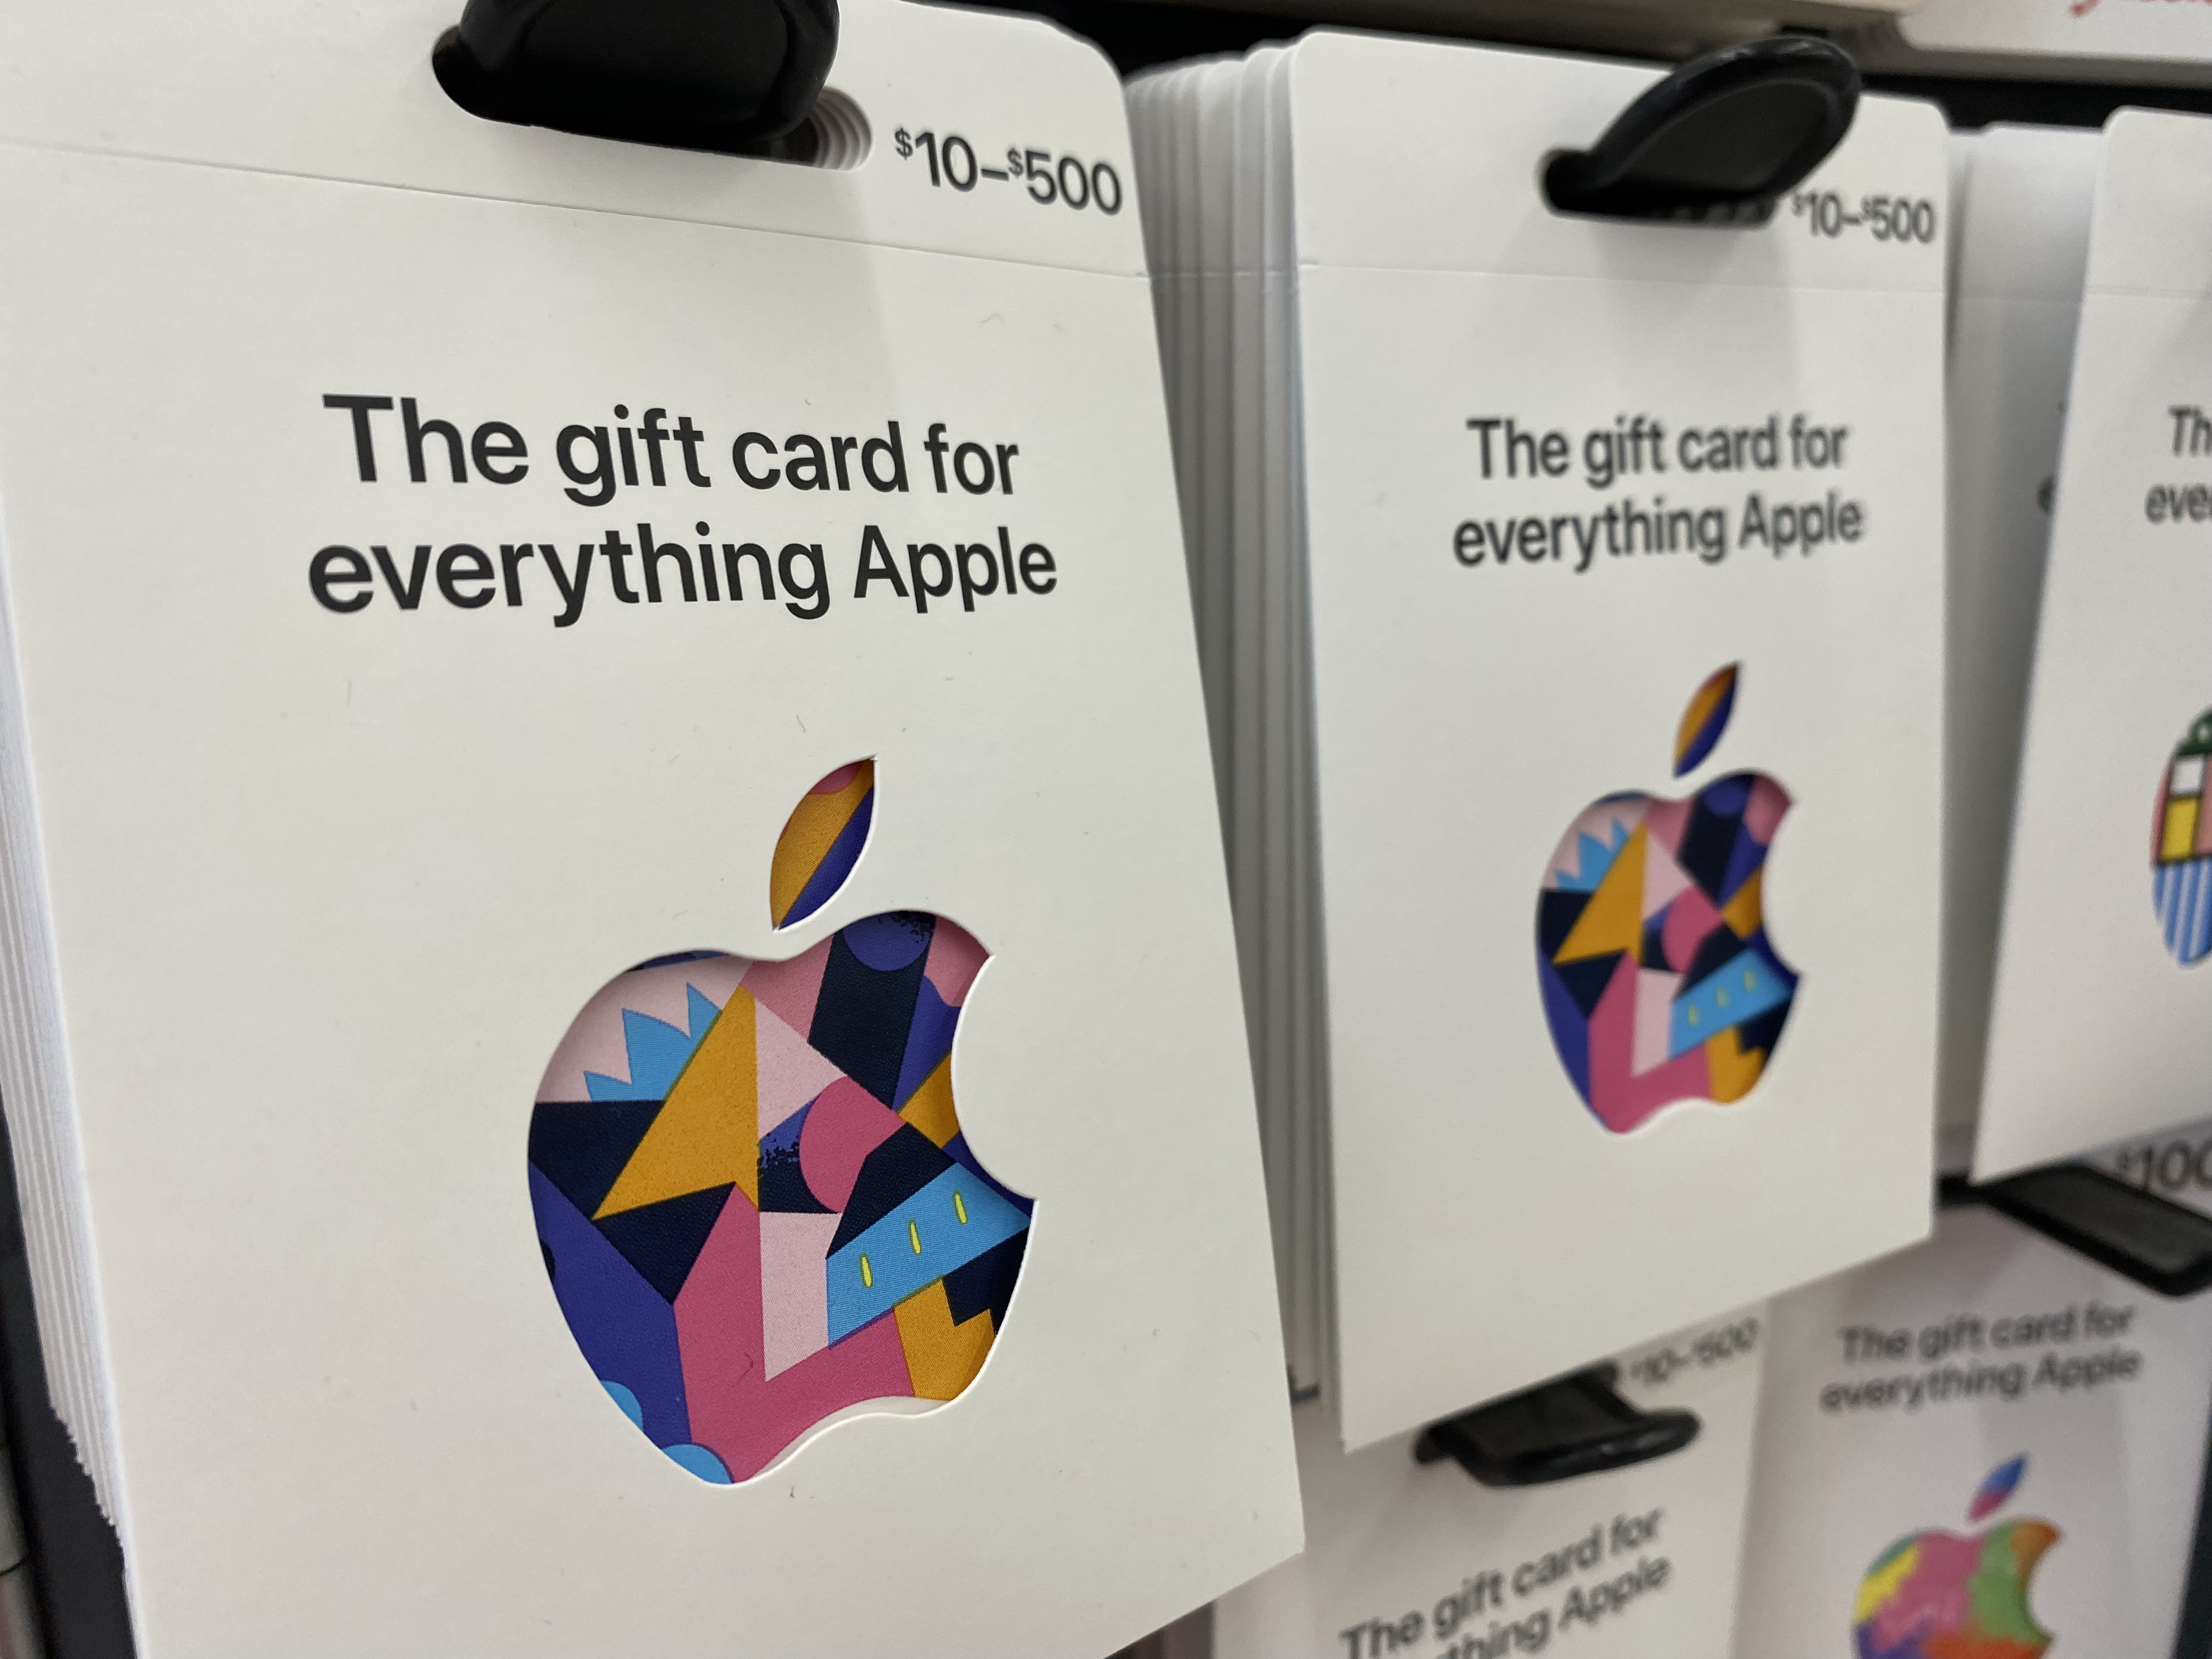 About Gift Card Scams – Official Apple Support